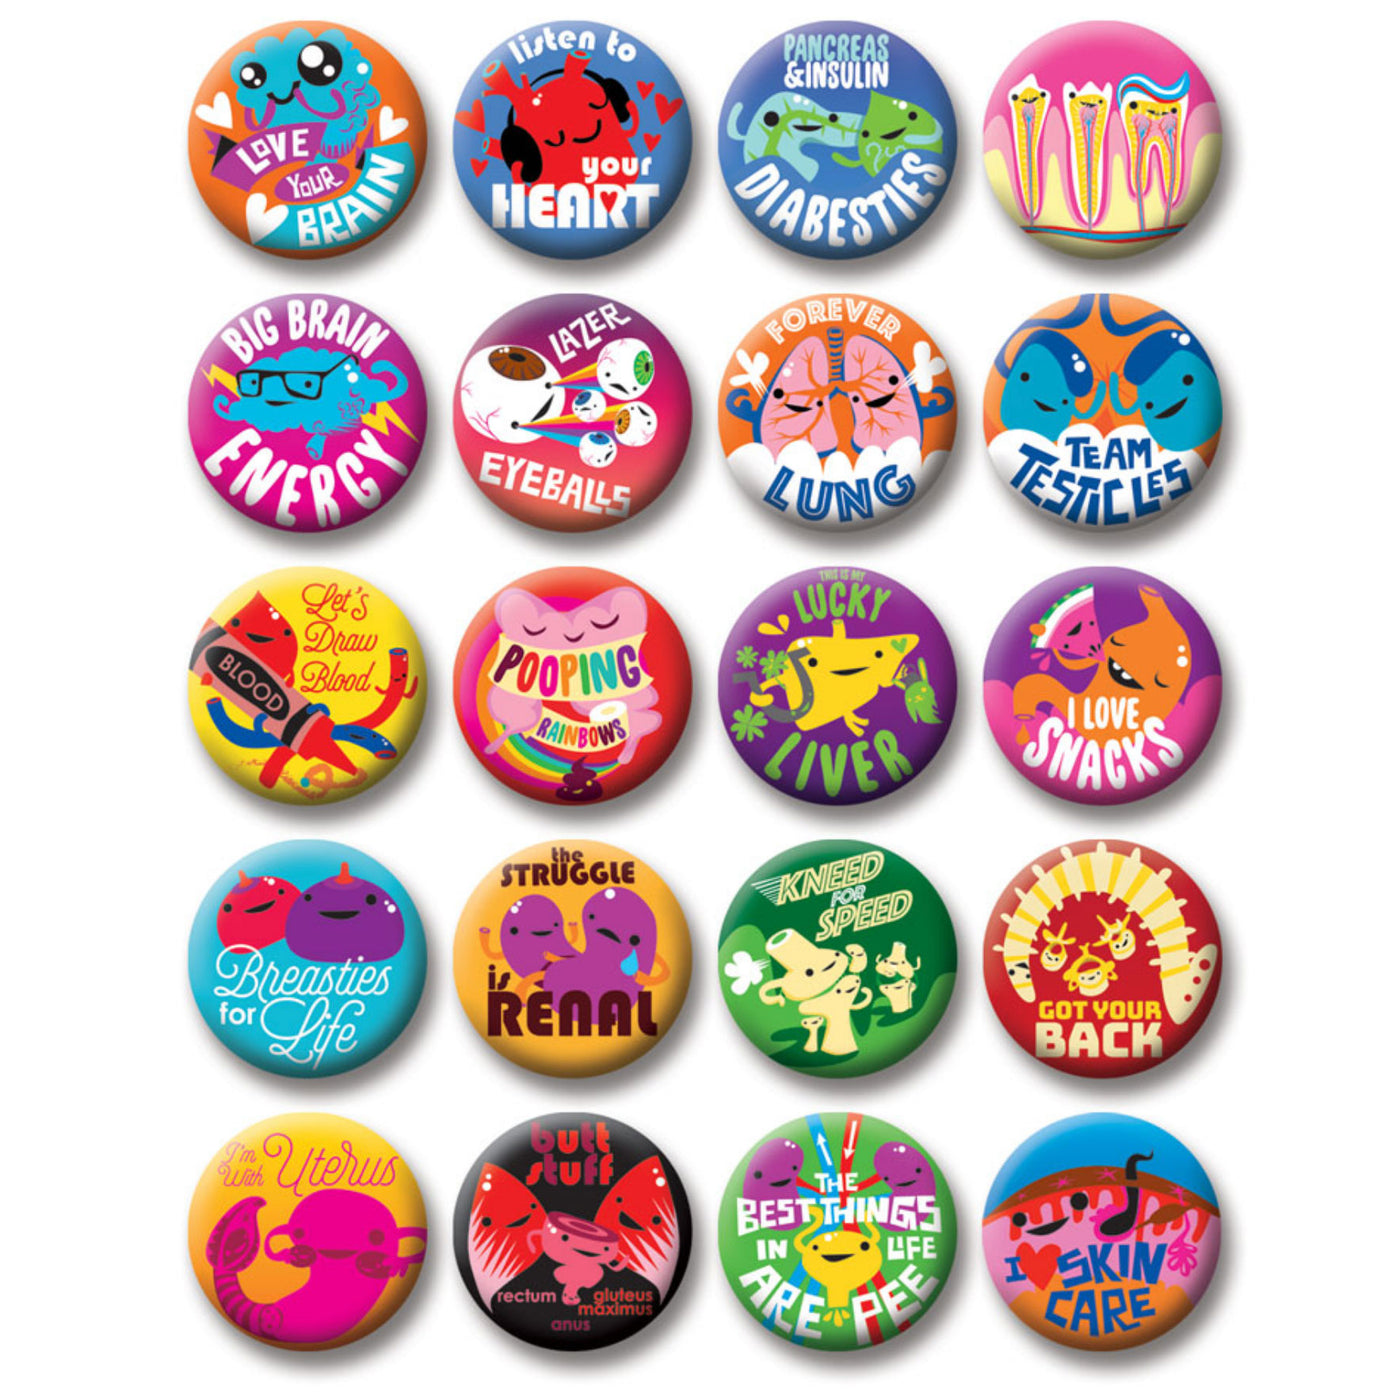 Cute Organs & Health Care Funny Button Set of 20 Badges - I Heart Guts